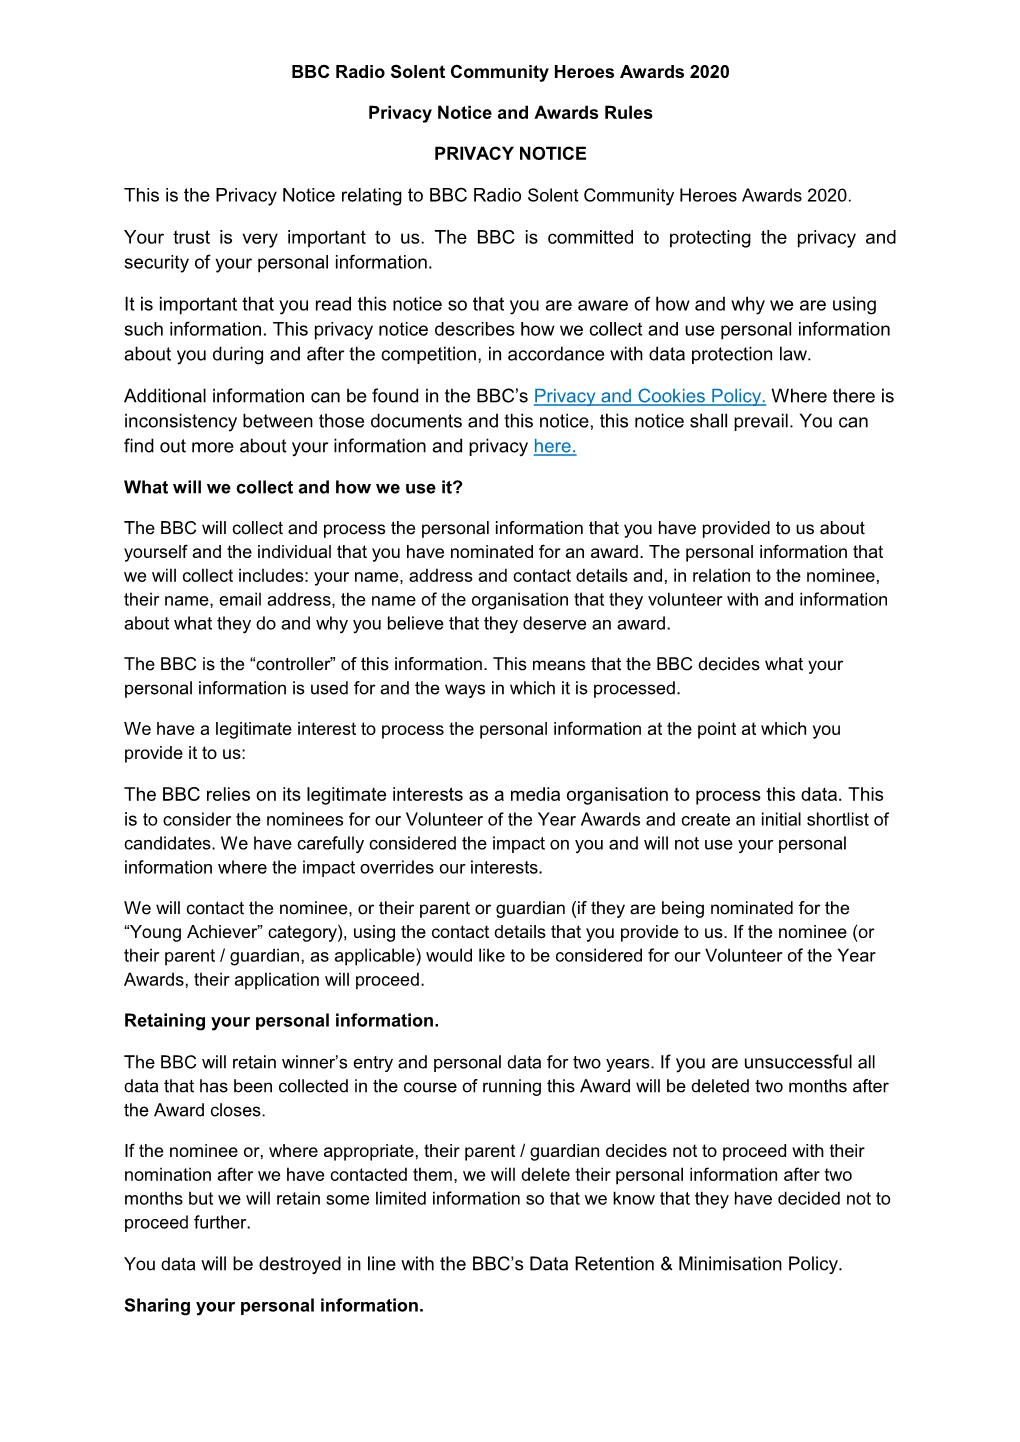 This Is the Privacy Notice Relating to BBC Radio Solent Community Heroes Awards 2020